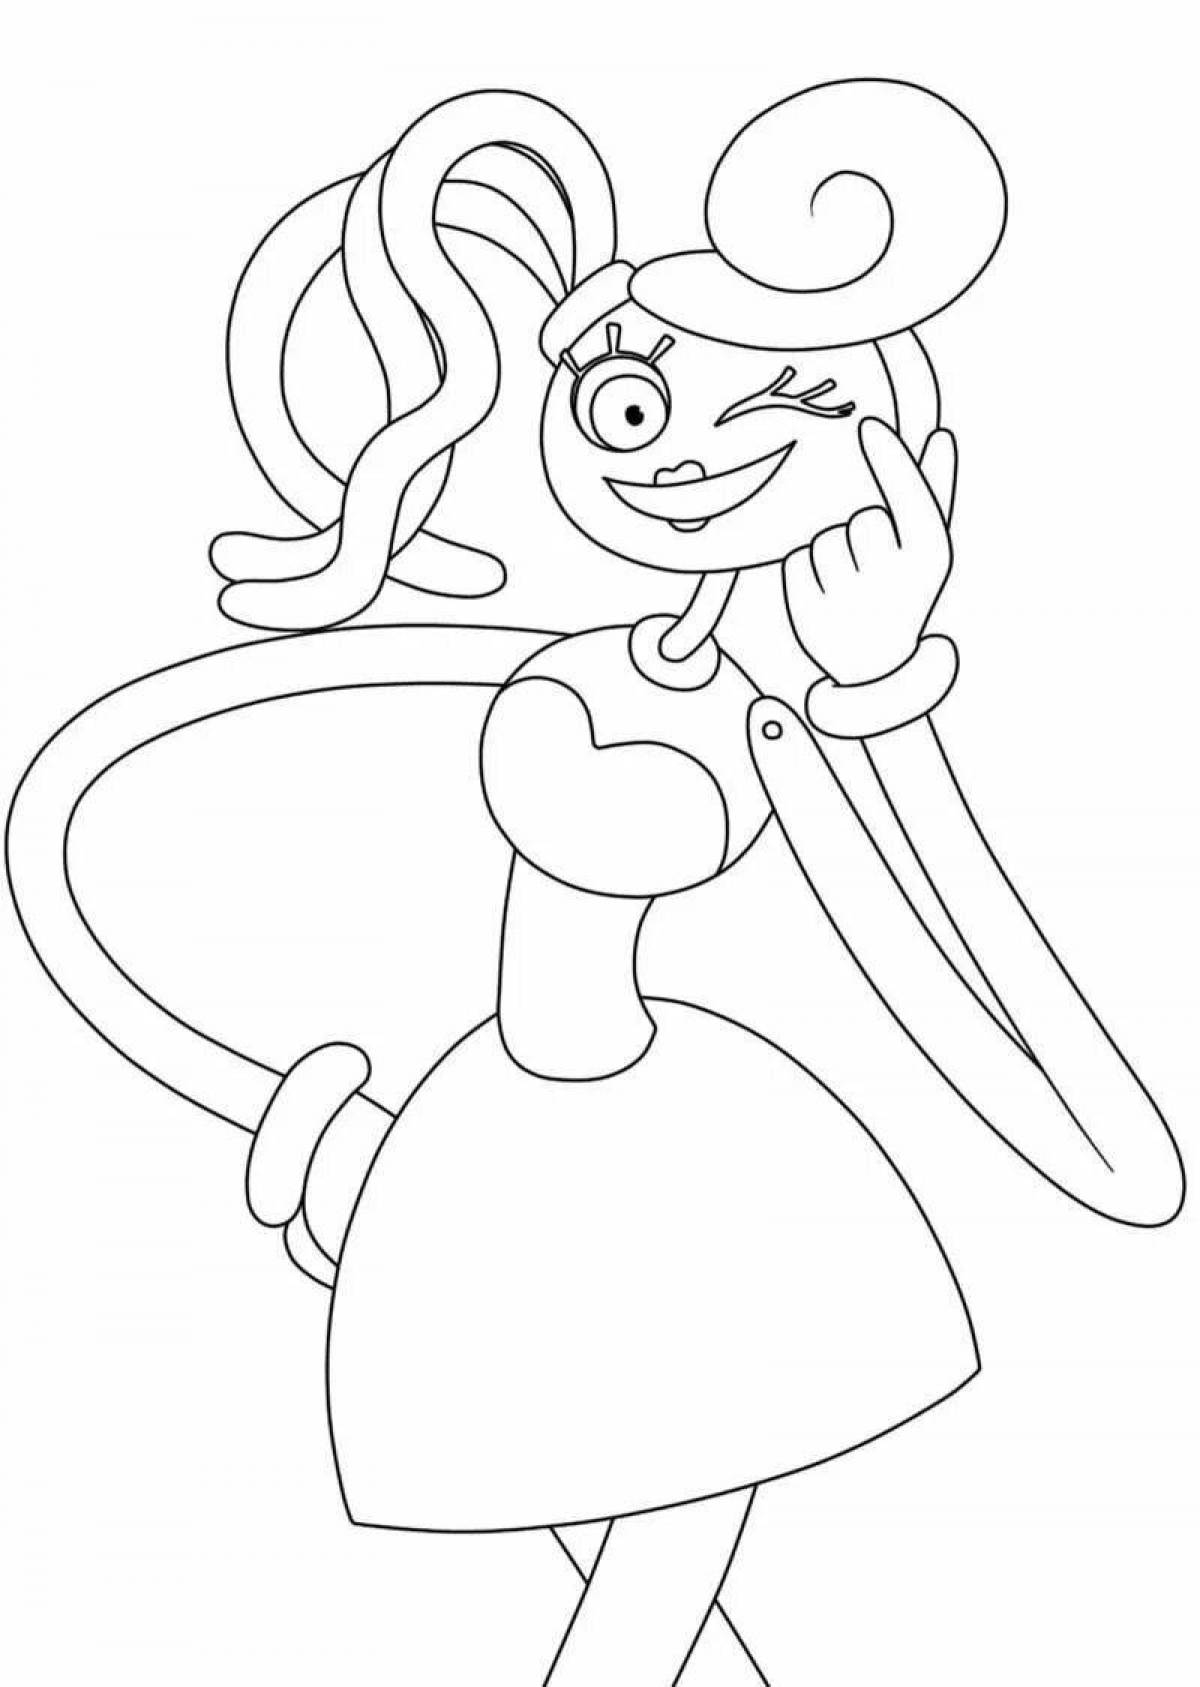 Poppy playtime shiny coloring page